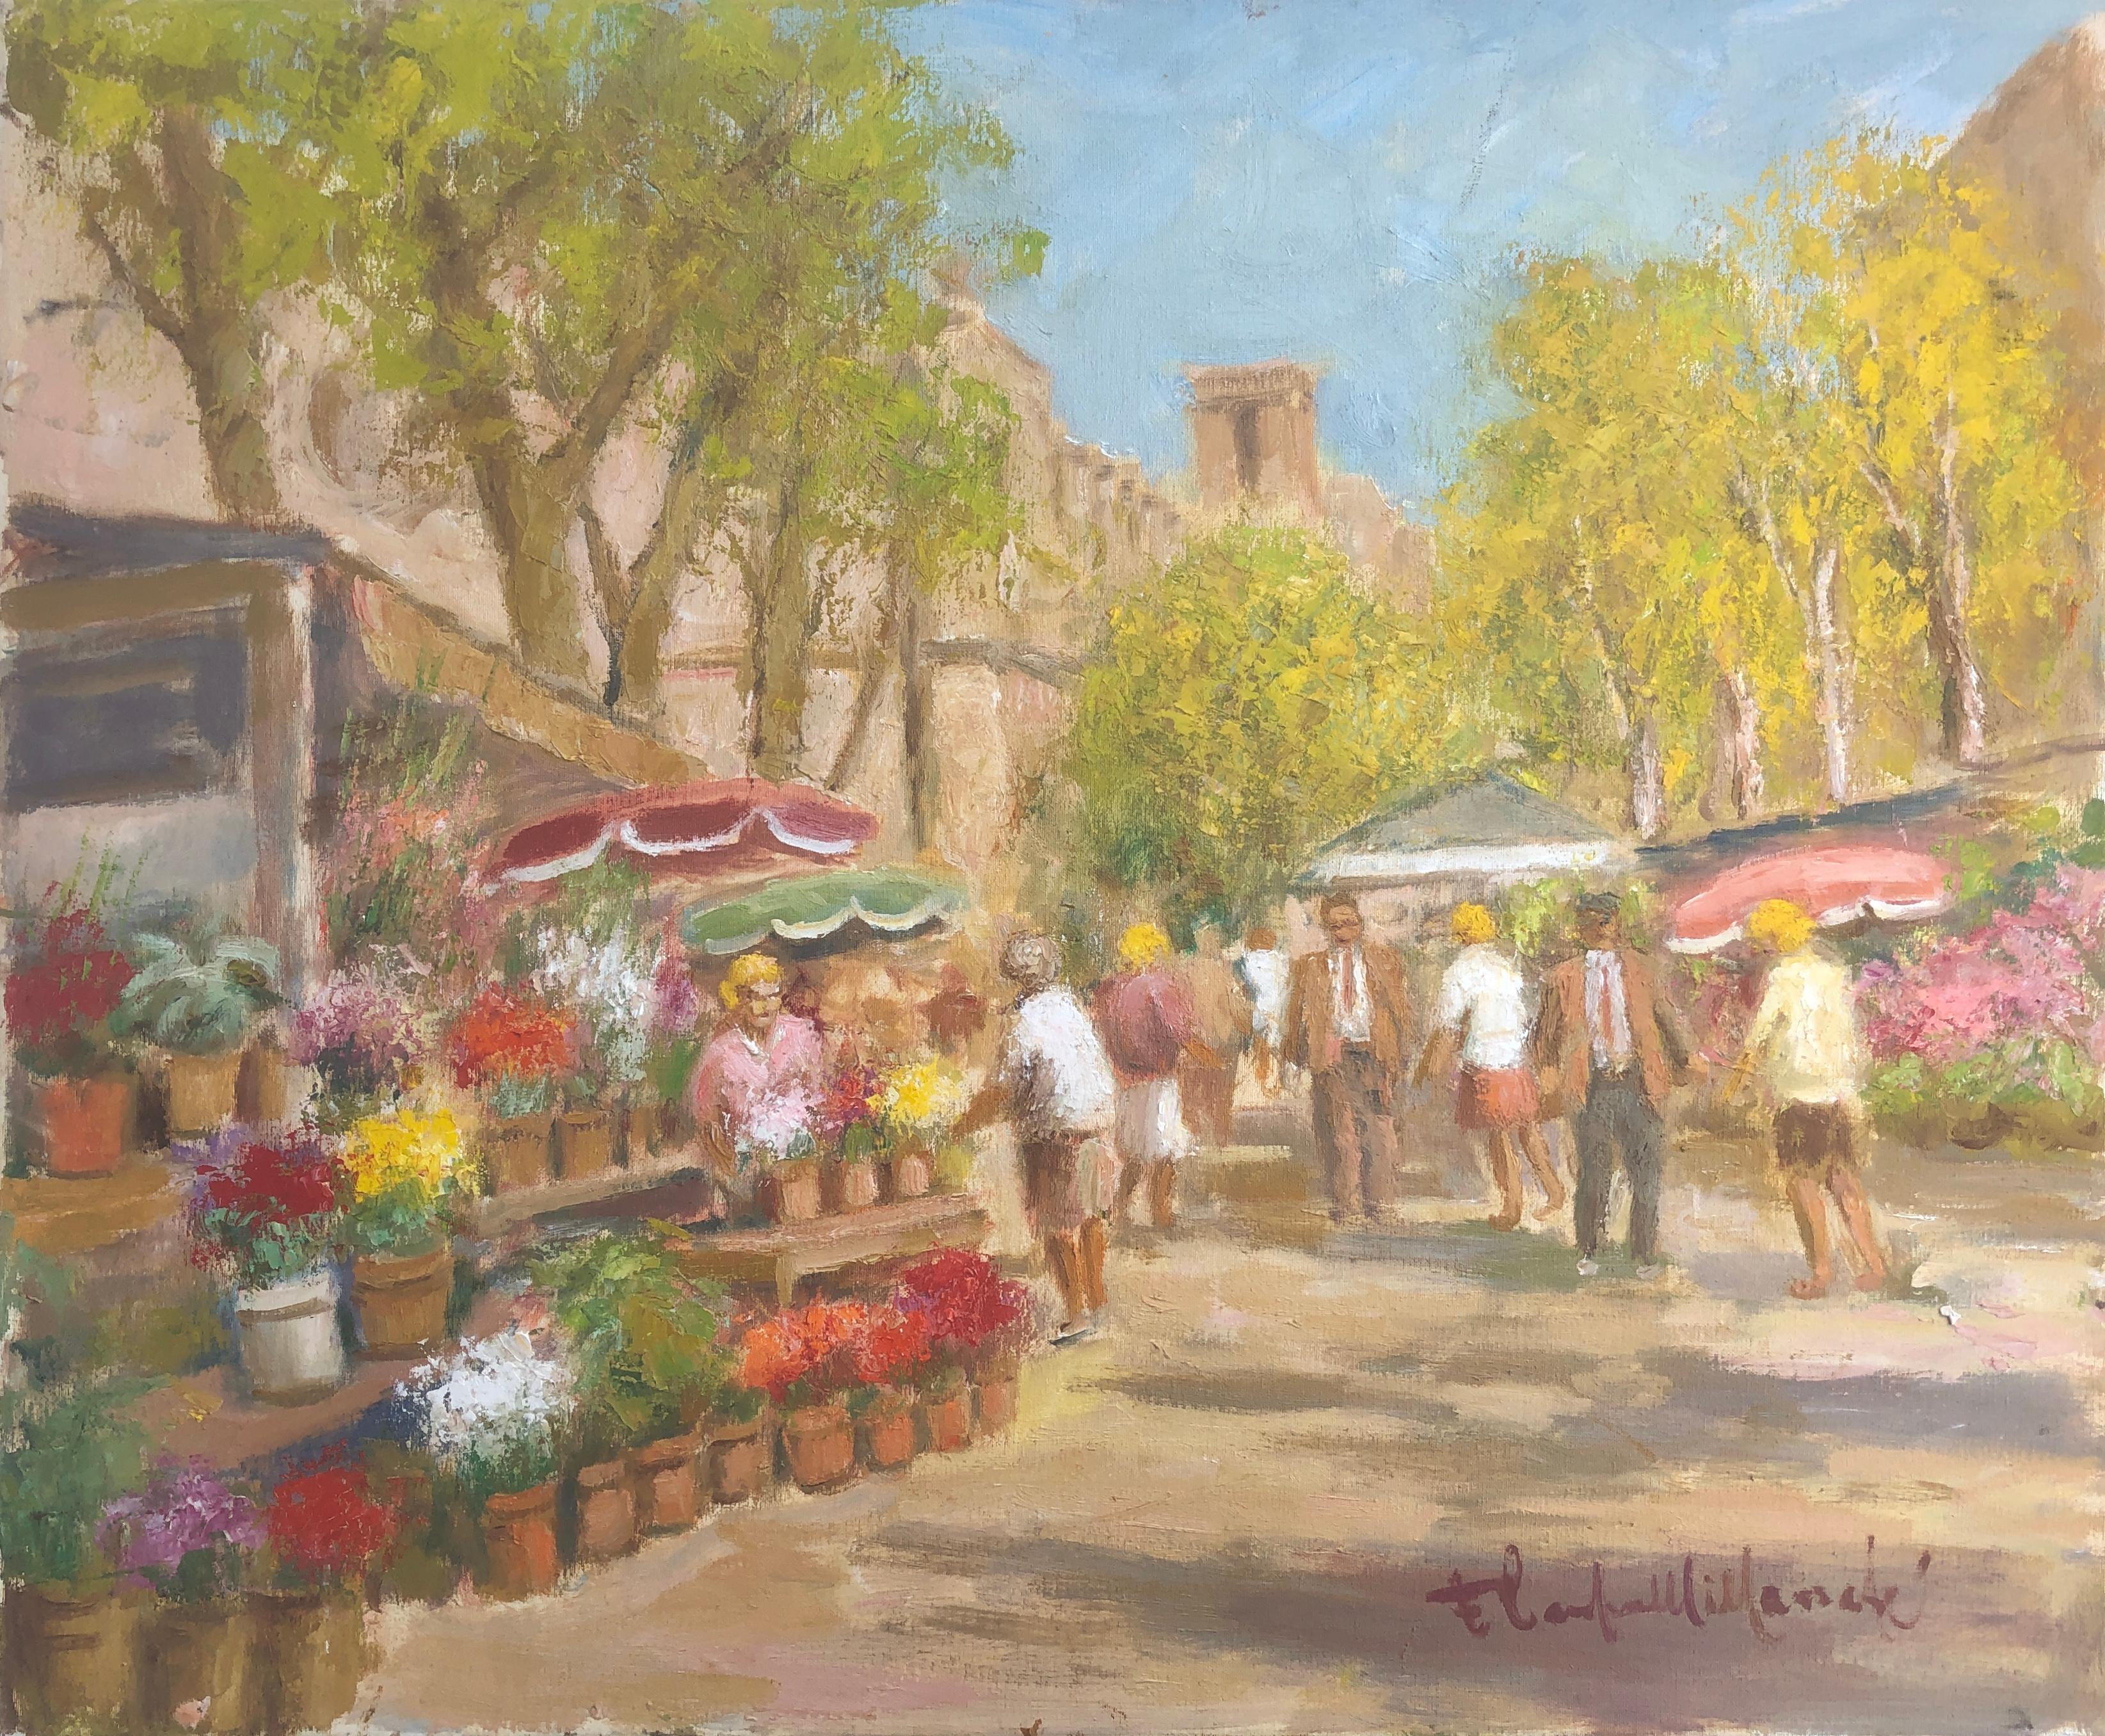 Francisco Carbonell Massabe Landscape Painting - Barcelona Spain oil on canvas painting Rambla flowers urbanscape